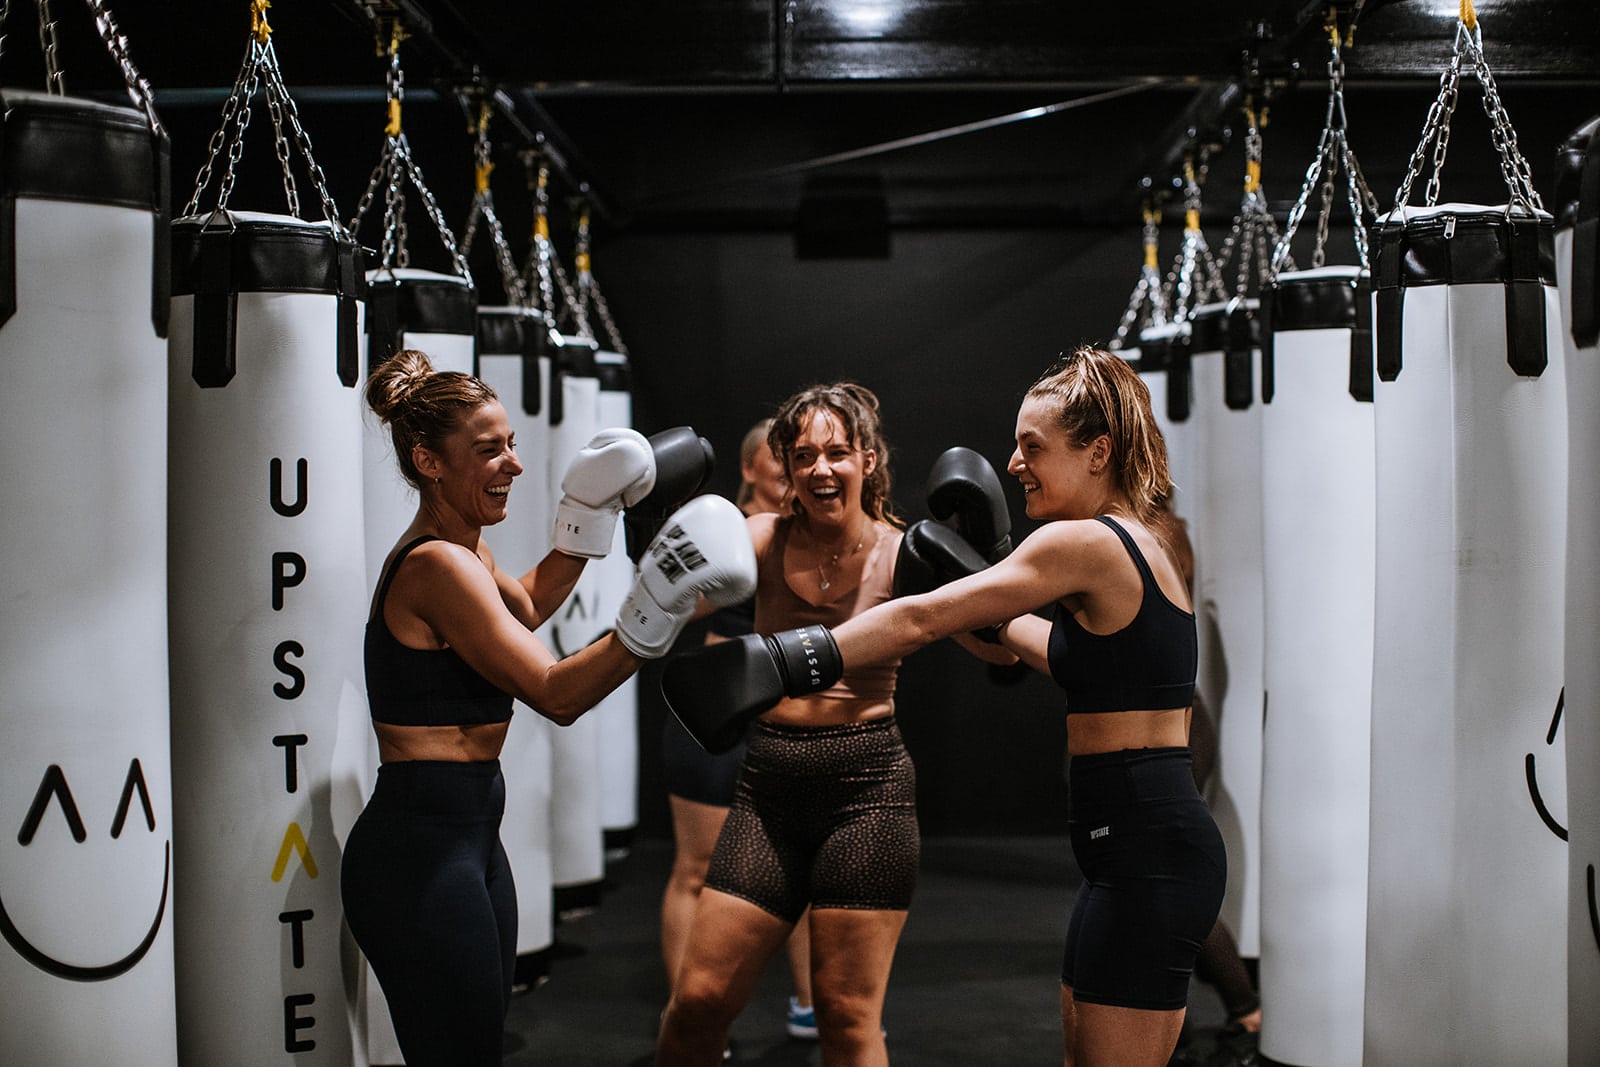 Group of people working out in a boxing class at Upstate Studios laugh happily together. They are wearing boxing gloves and activewear and smiling warmly as they enjoy a fun playful fitness class.